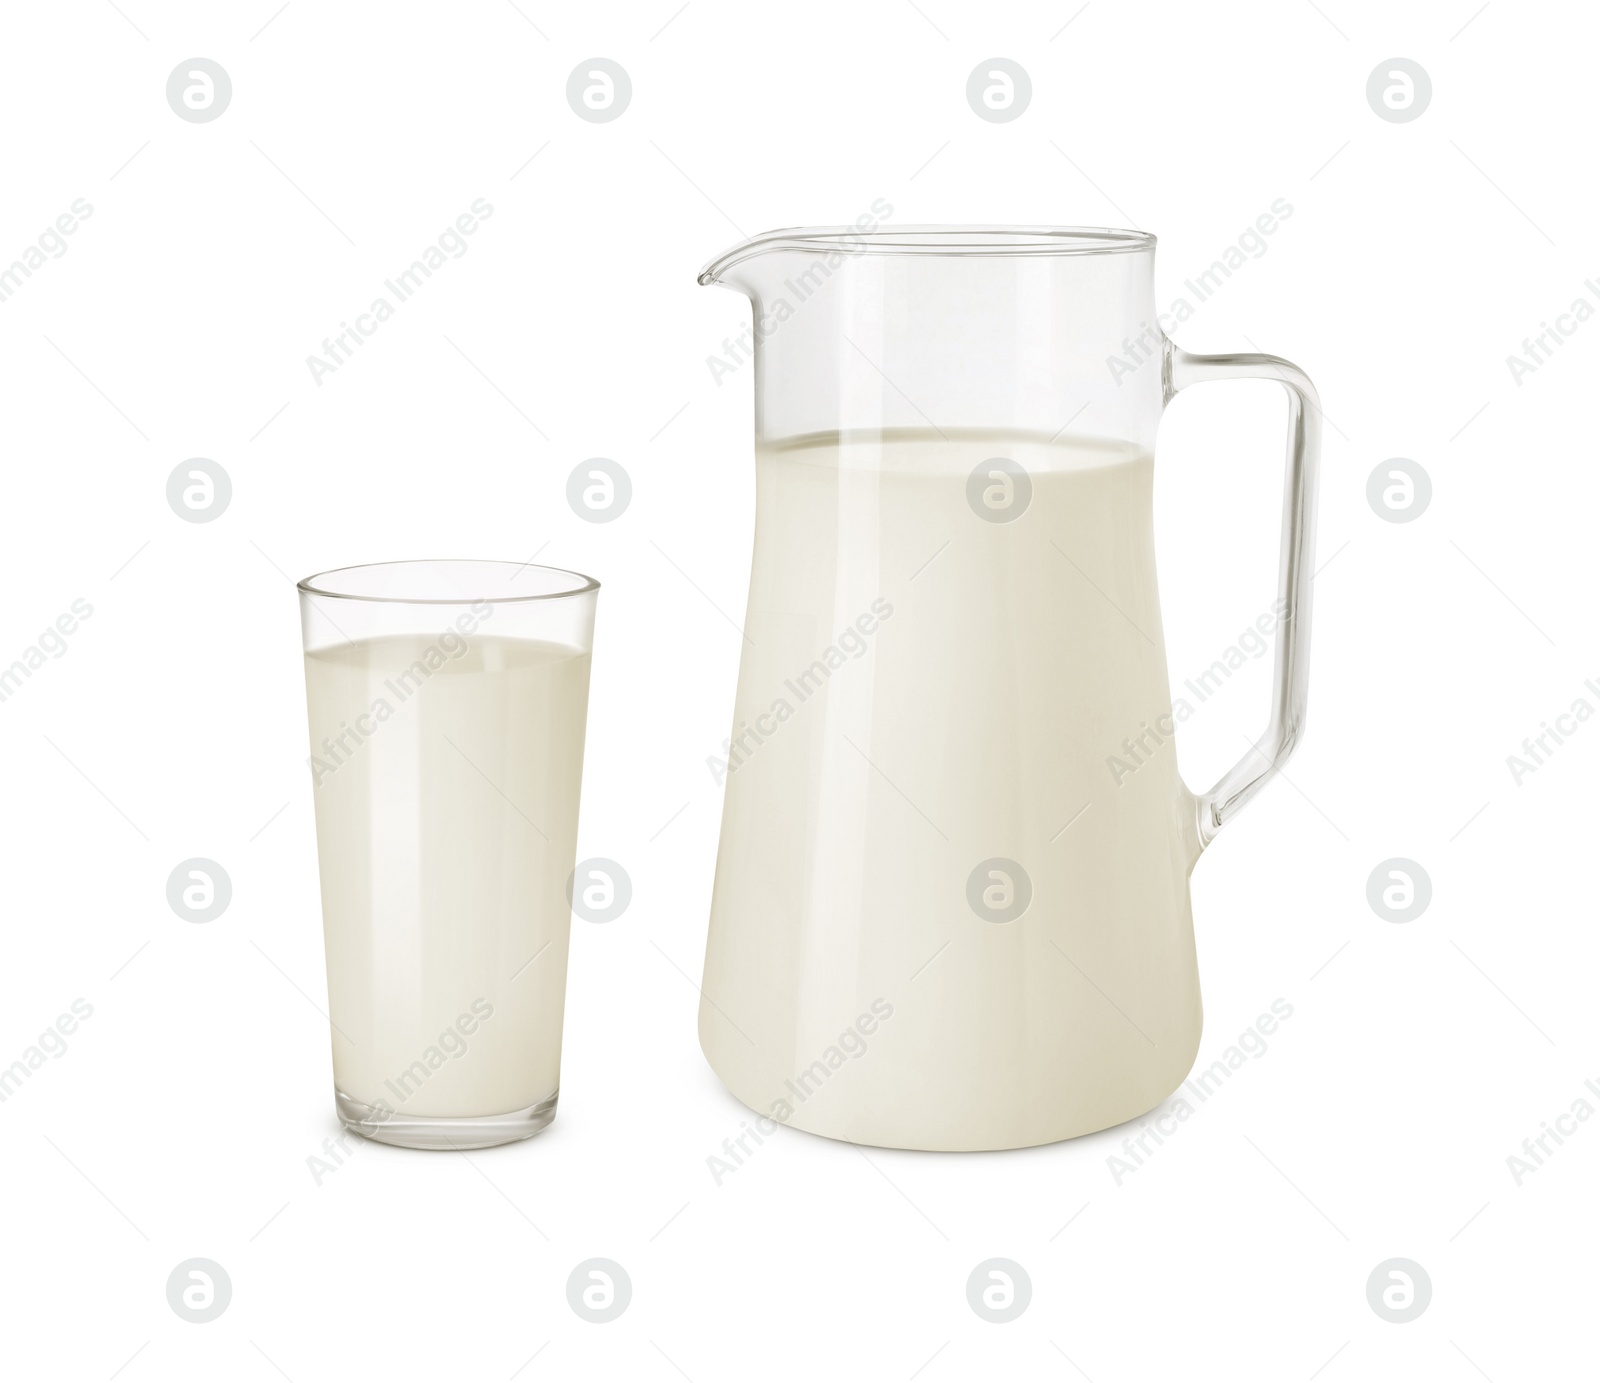 Image of Glass and jug with milk isolated on white